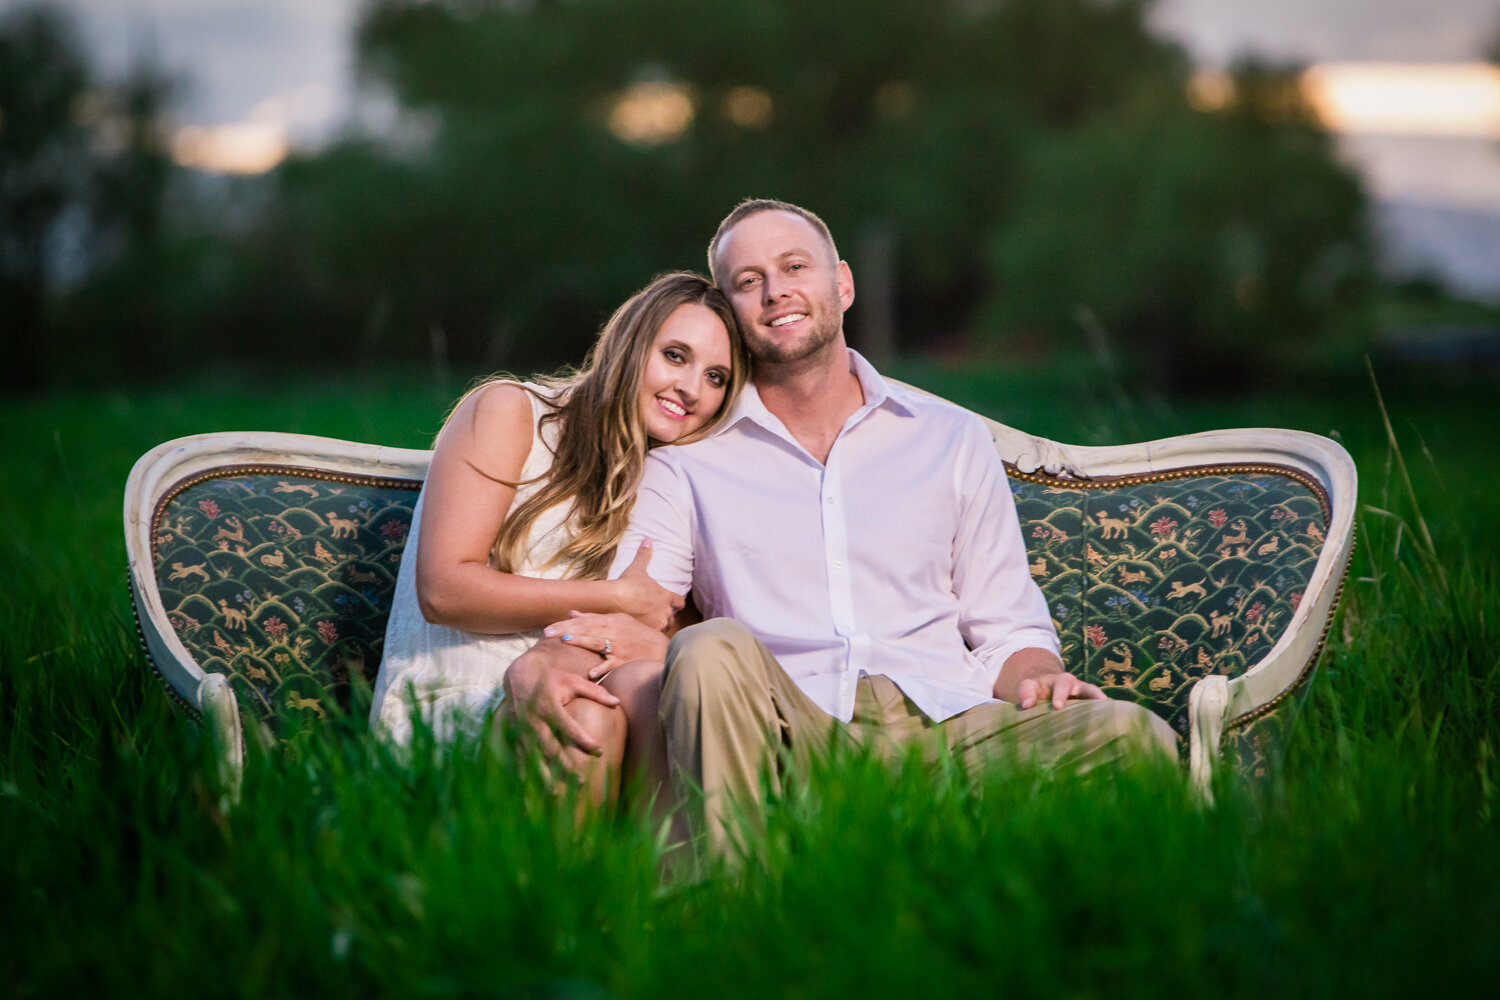  Sunset Engagments at Sandstone Ranch. Take by Jared M. Gant 